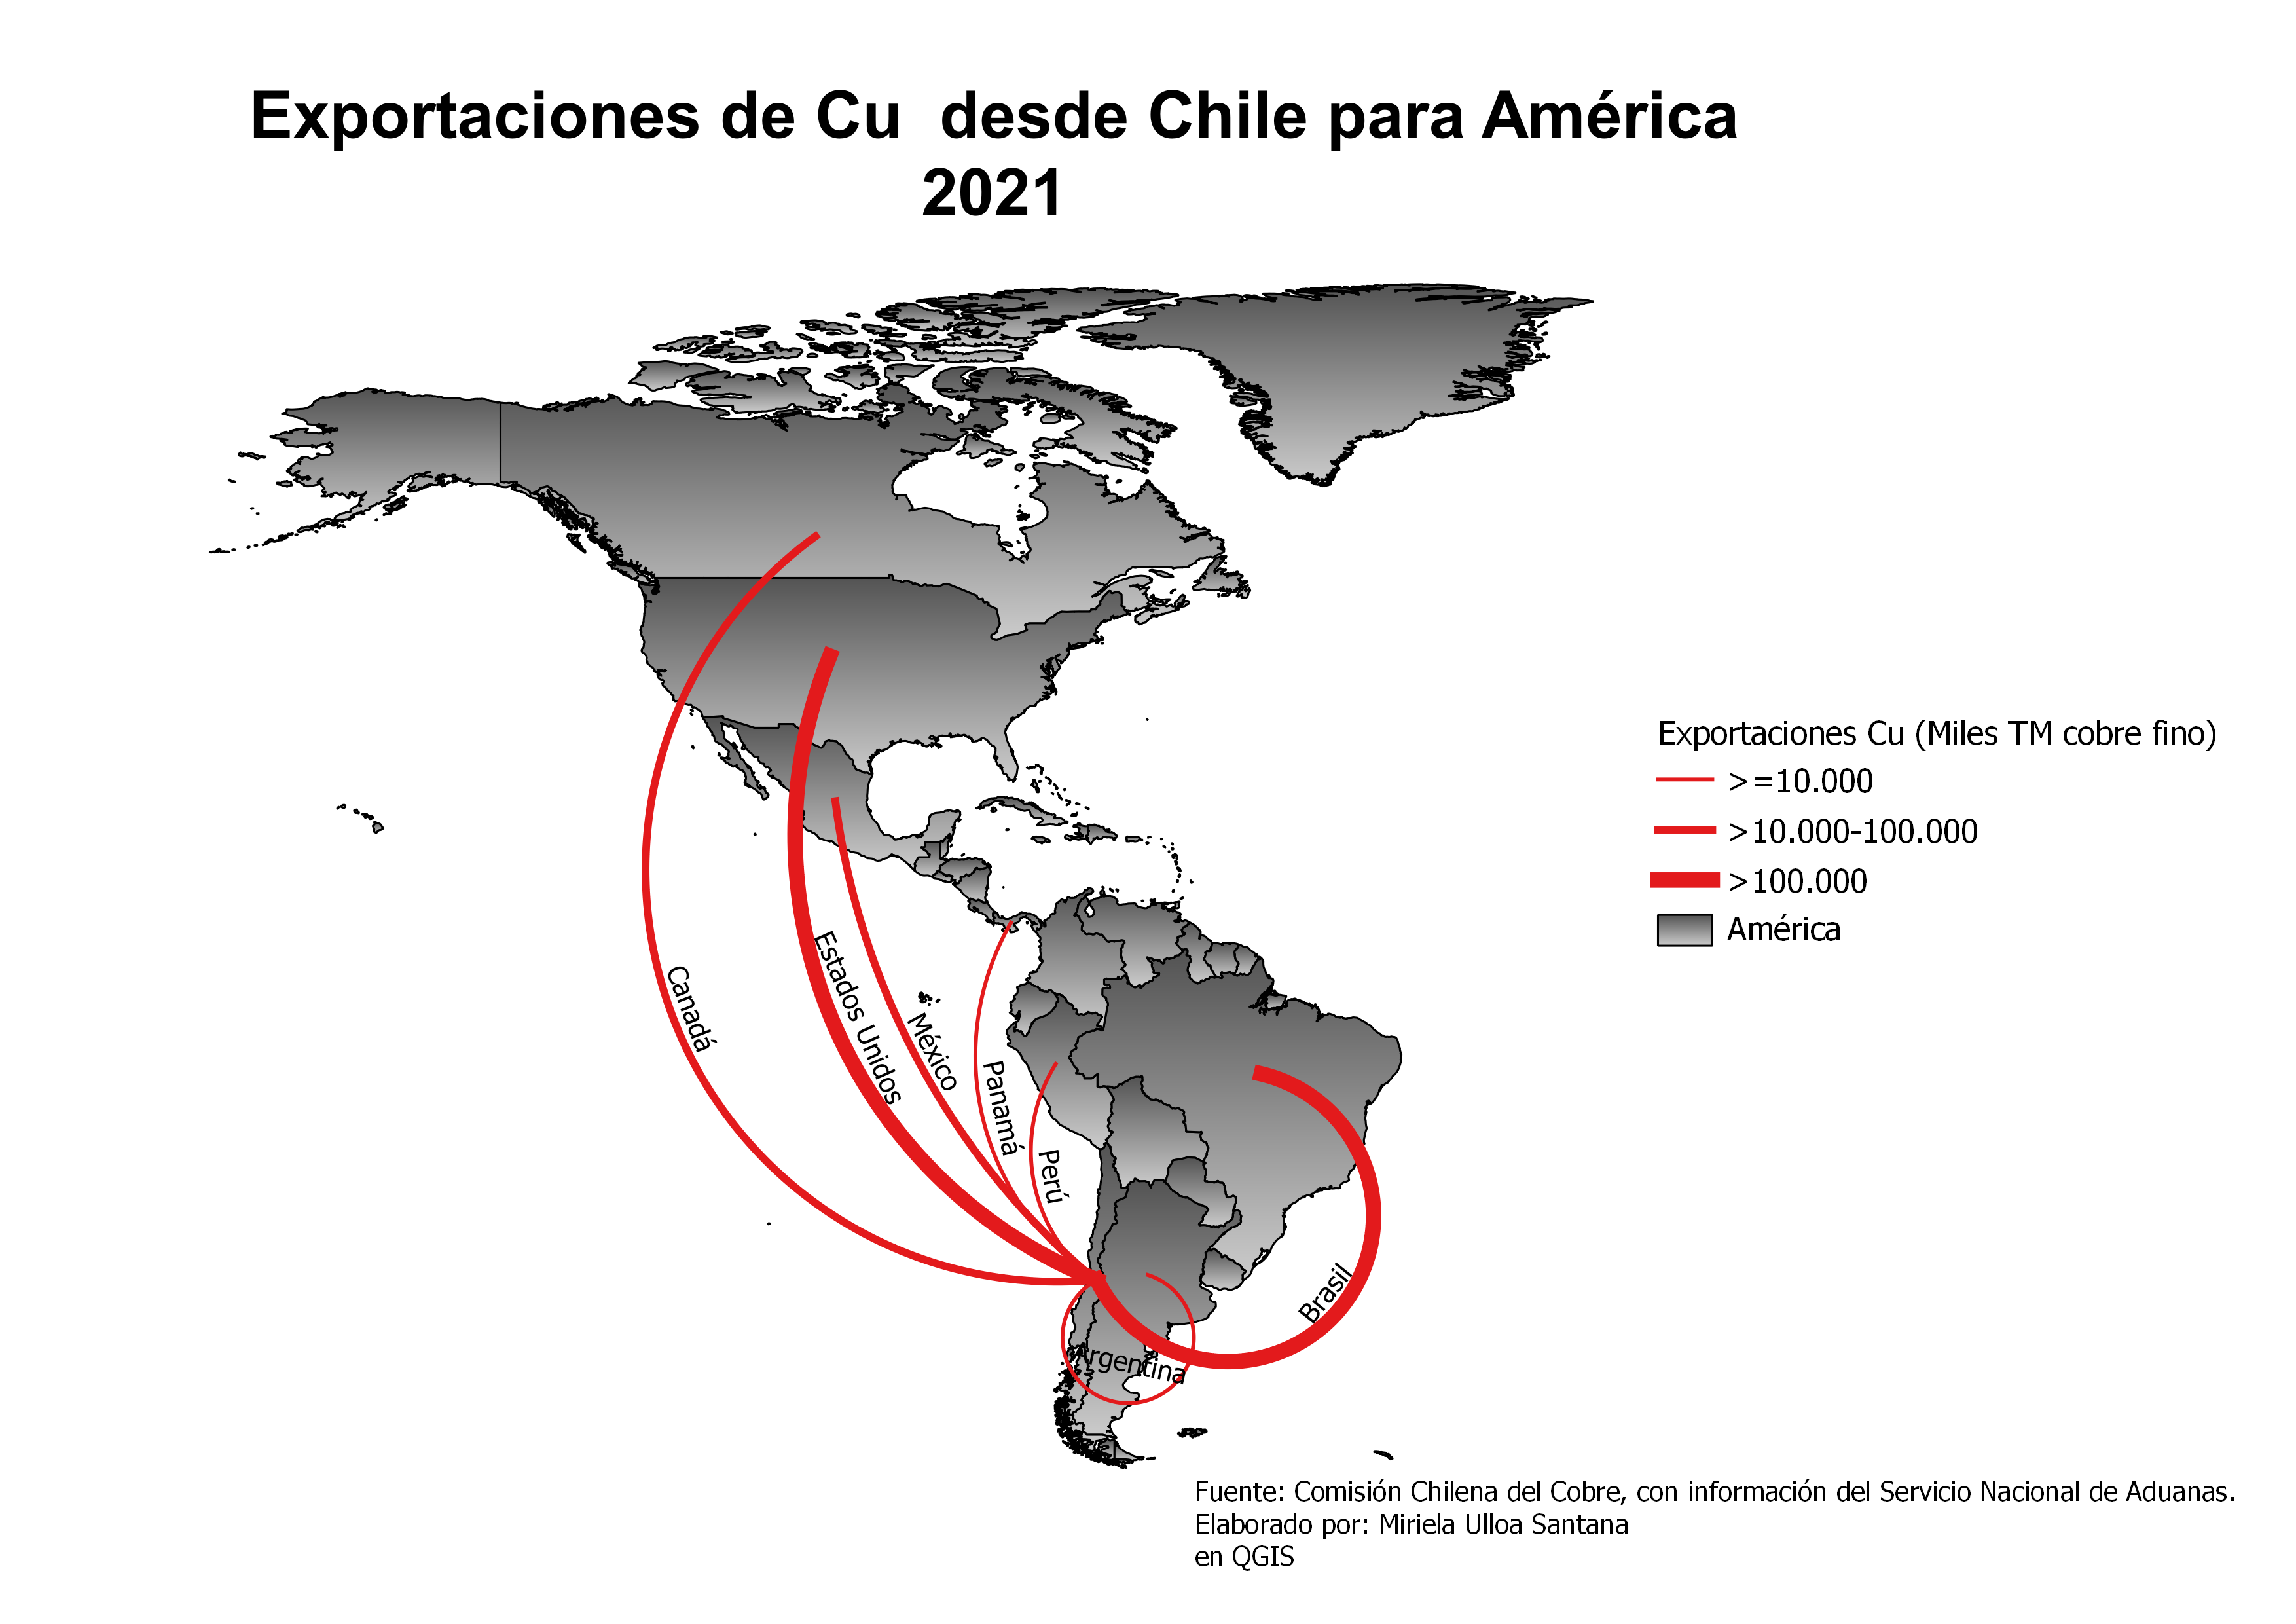 Cu exports from Chile to America in 2021